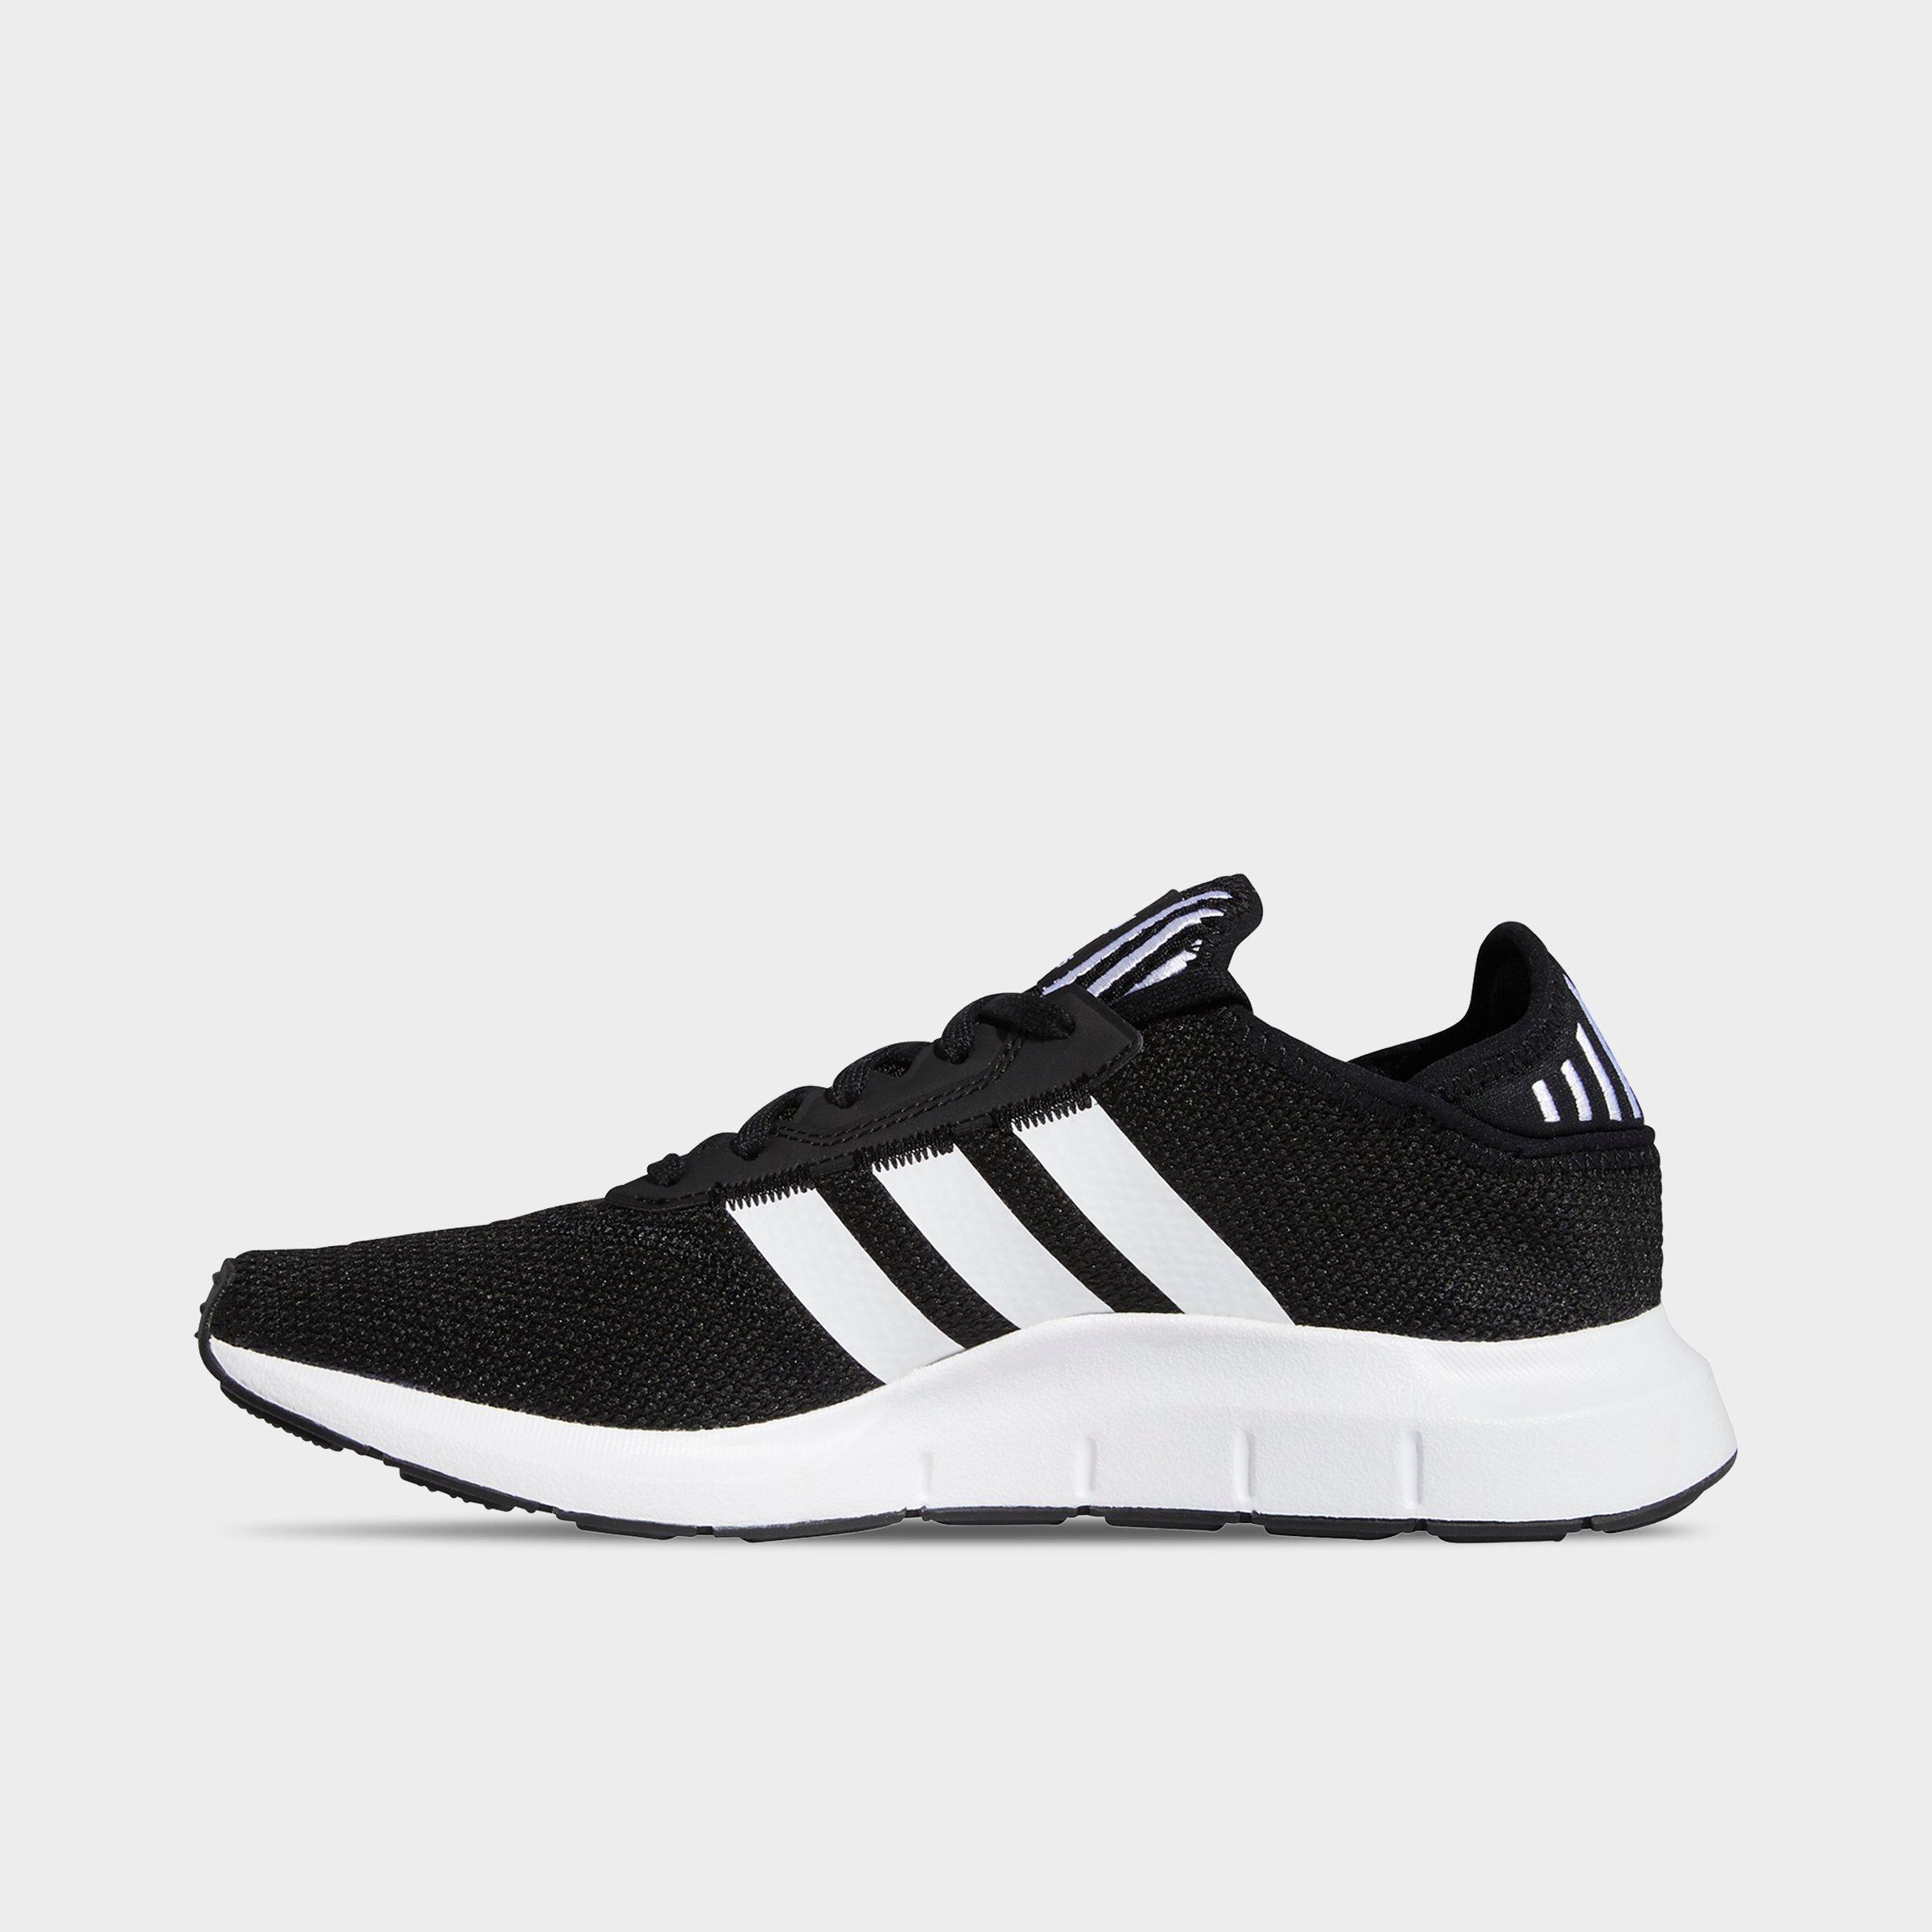 adidas men's swift run casual sneakers from finish line